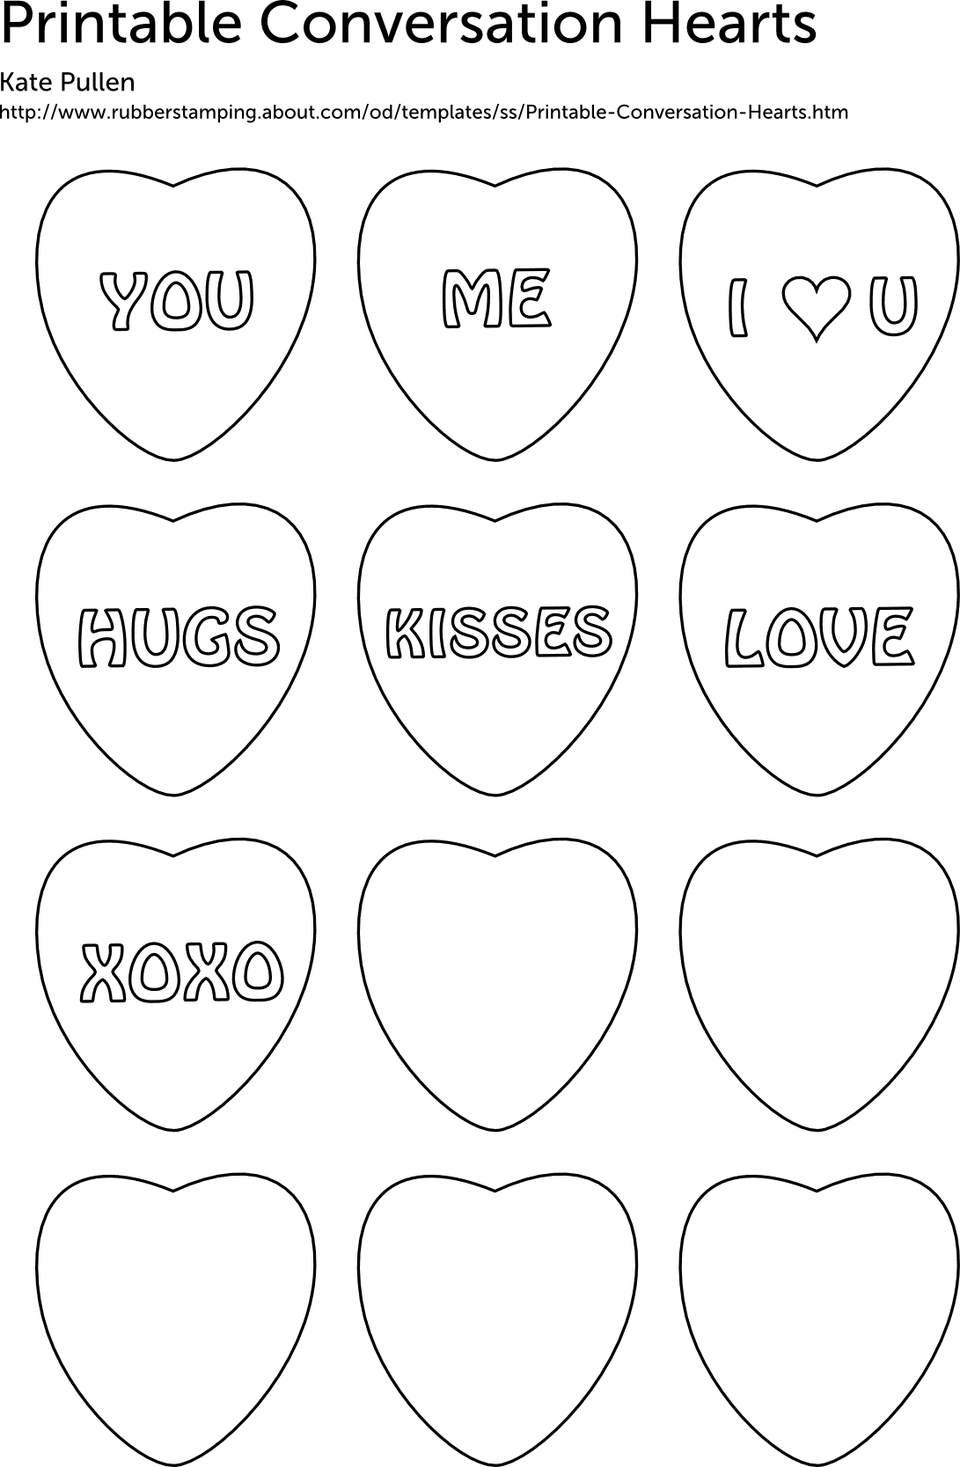 Free Printable Conversation Hearts for Valentine's Day